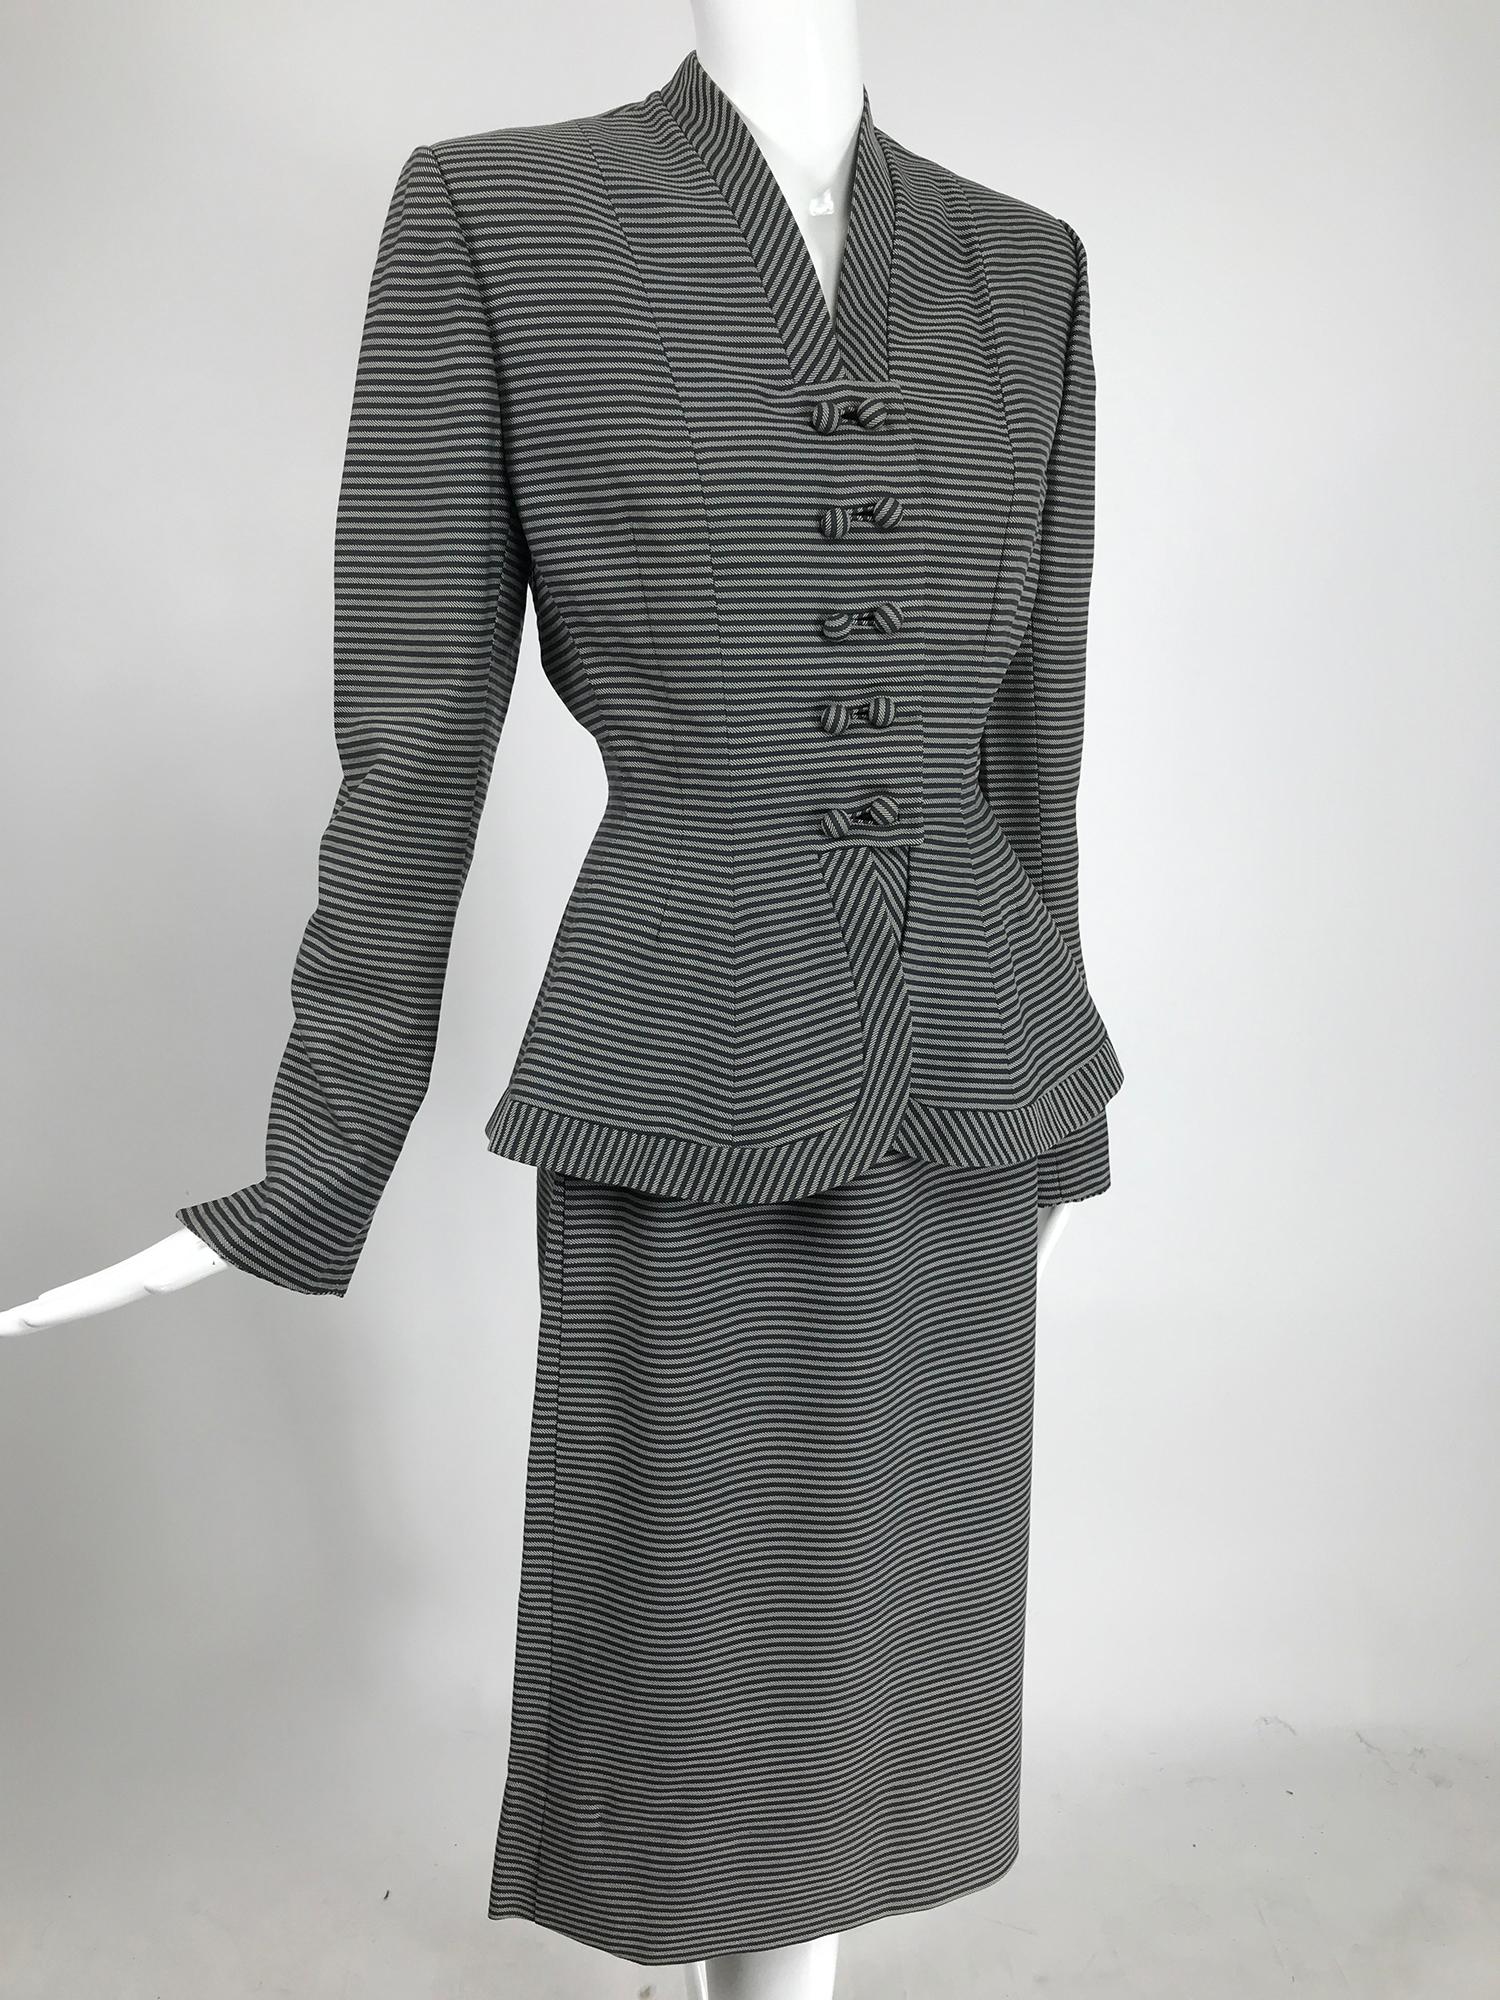 Lilli Ann 1940s nip waist peplum hem black and white stripe wool skirt suit. Stylish suit, the jacket gives a nod to Christian Dior's Bar suit. This jacket is really great in narrow black and white horizontal stripes, the neck and hem facings are